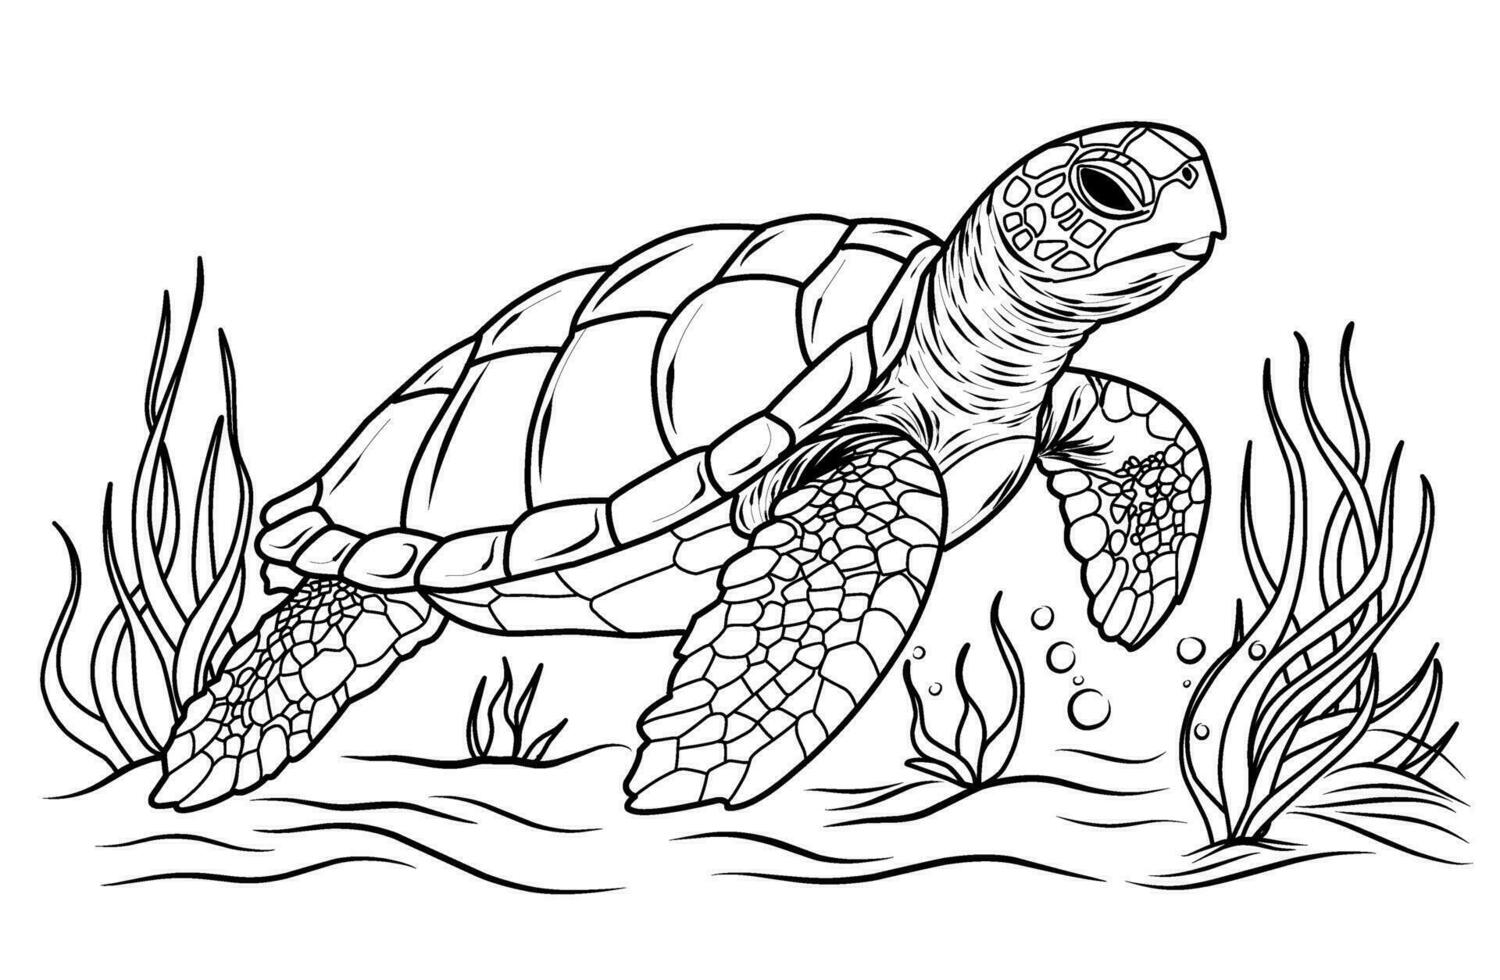 Big ocean turtle, cute striped fishes in the underwater world with algae, sand, bubbles on white isolated background. Good for kids and adults coloring book pages. vector